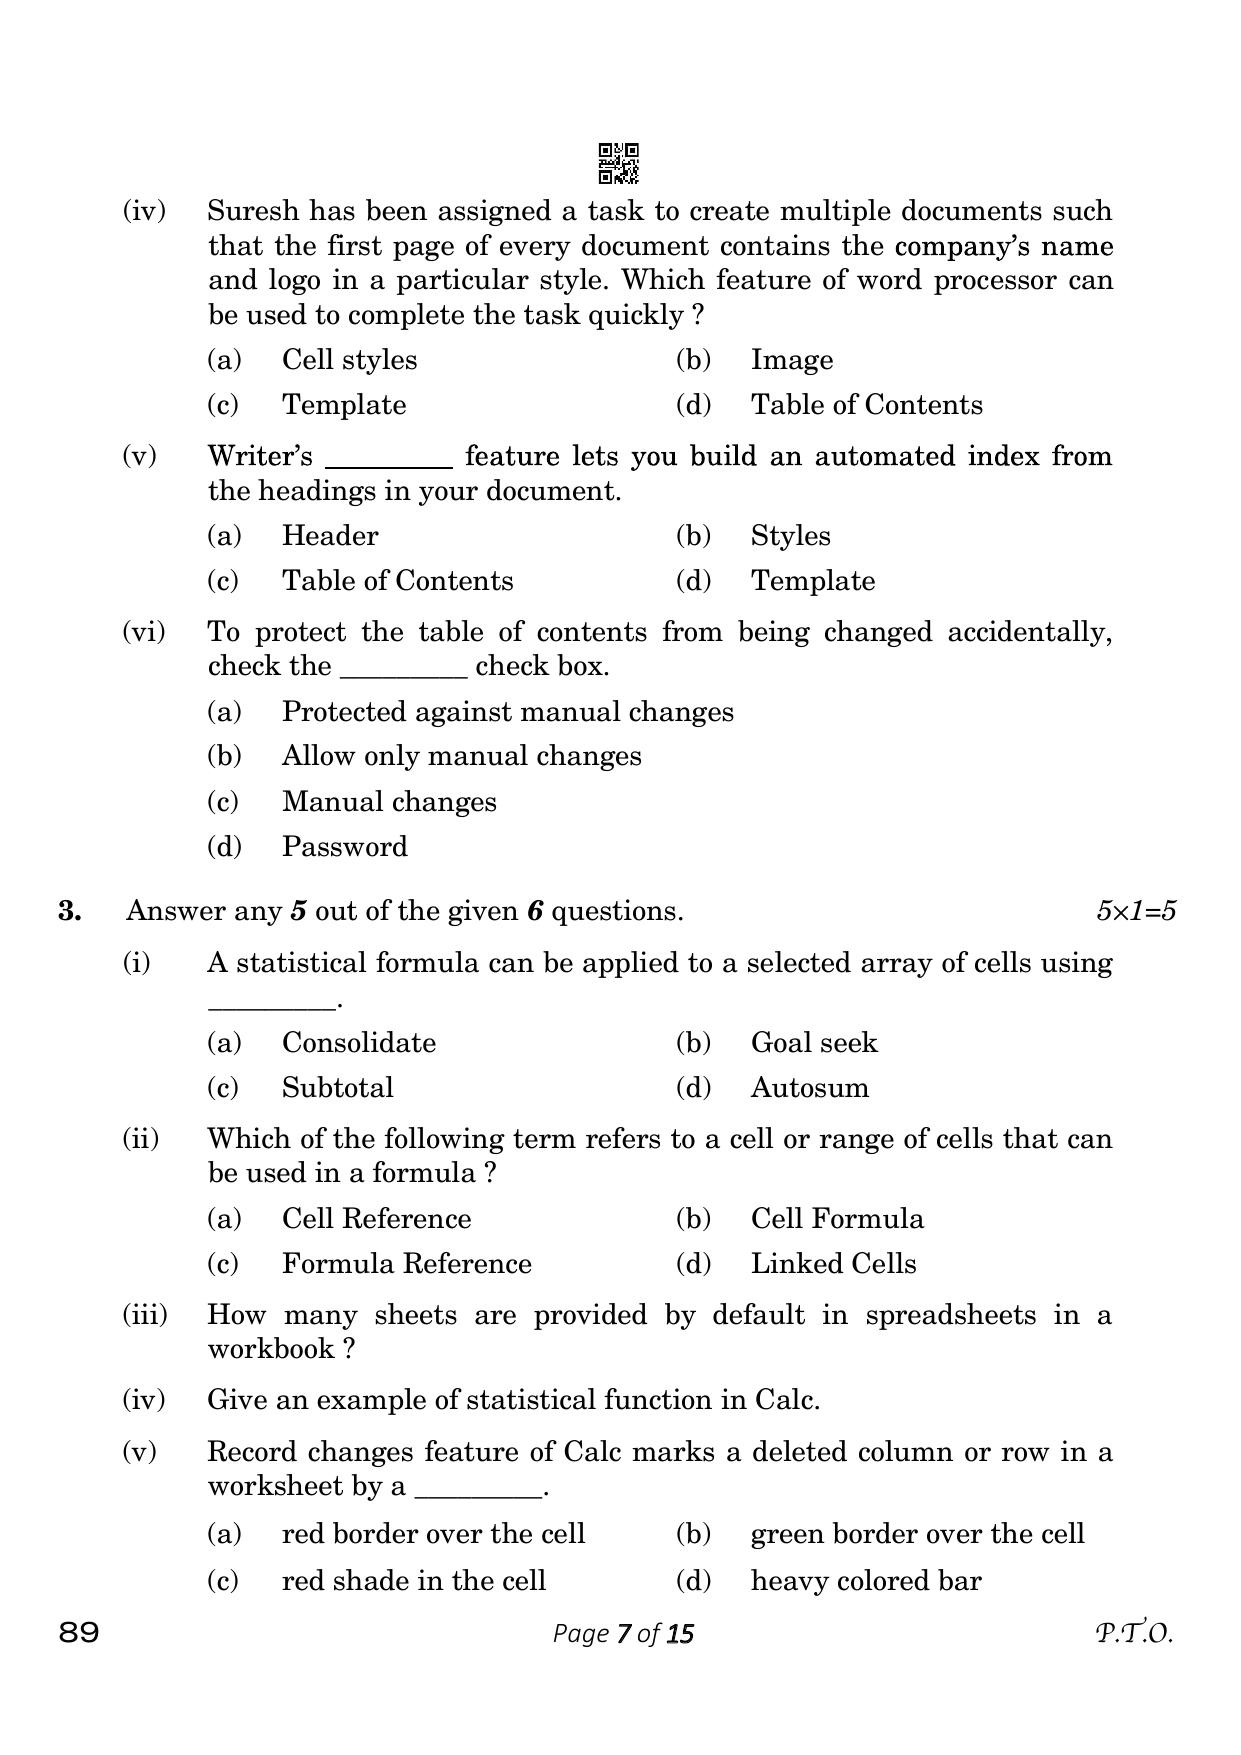 CBSE Class 10 Information Technology (Compartment) 2023 Question Paper - Page 7